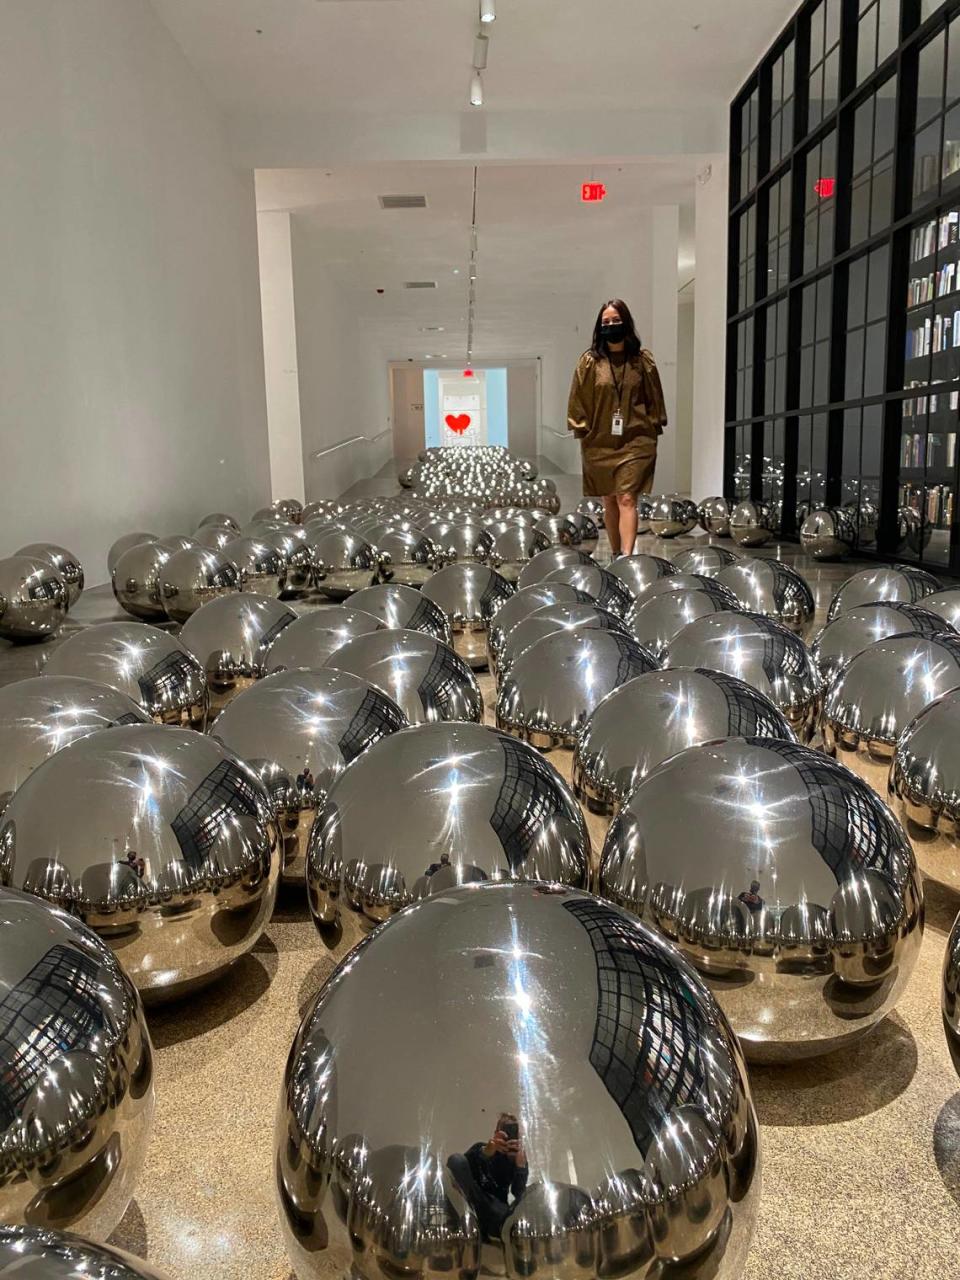 Yayoi Kusama’s 1966 ‘Narcissus Garden,’ consisting of 700 mirrored stainless-steel spheres, is on display at the Rubell Museum.